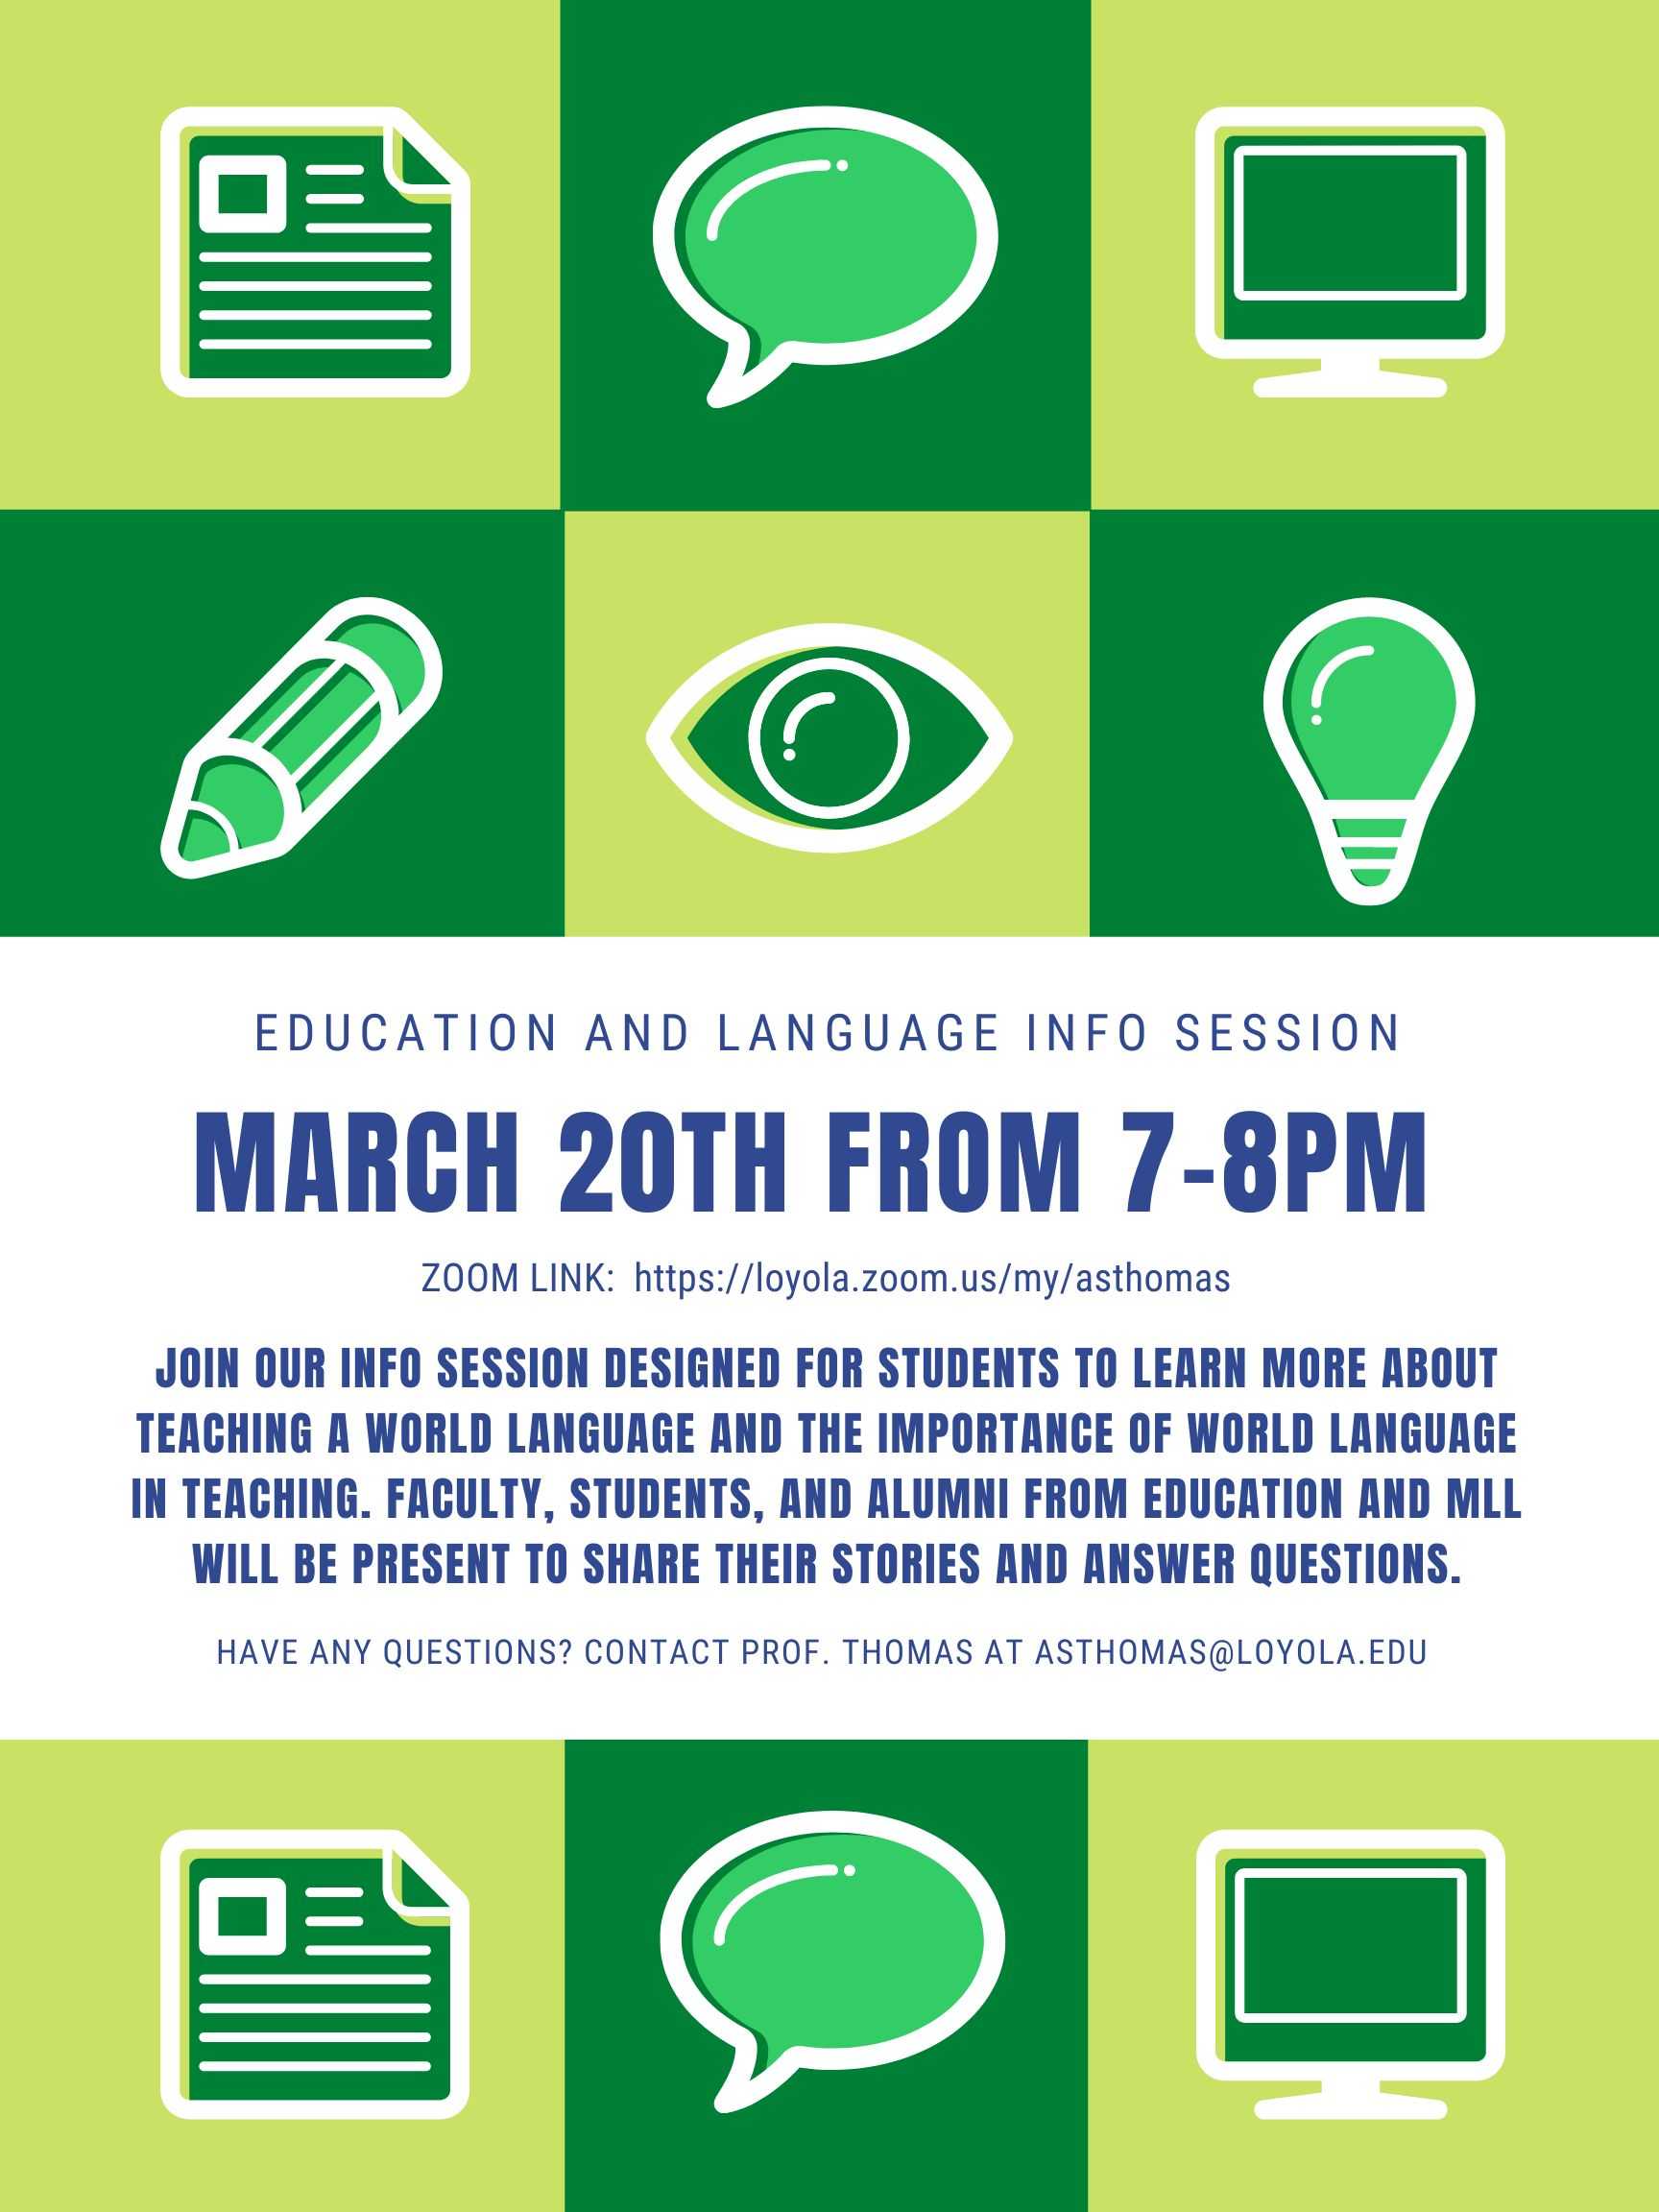 JOIN OUR INFO SESSION DESIGNED FOR STUDENTS TO LEARN MORE ABOUT TEACHING A WORLD LANGUAGE AND THE IMPORTANCE OF WORLD LANGUAGE IN TEACHING. FACULTY, STUDENTS, AND ALUMNI FROM EDUCATION AND MLL WILL BE PRESENT TO SHARE THEIR STORIES AND ANSWER QUESTIONS.